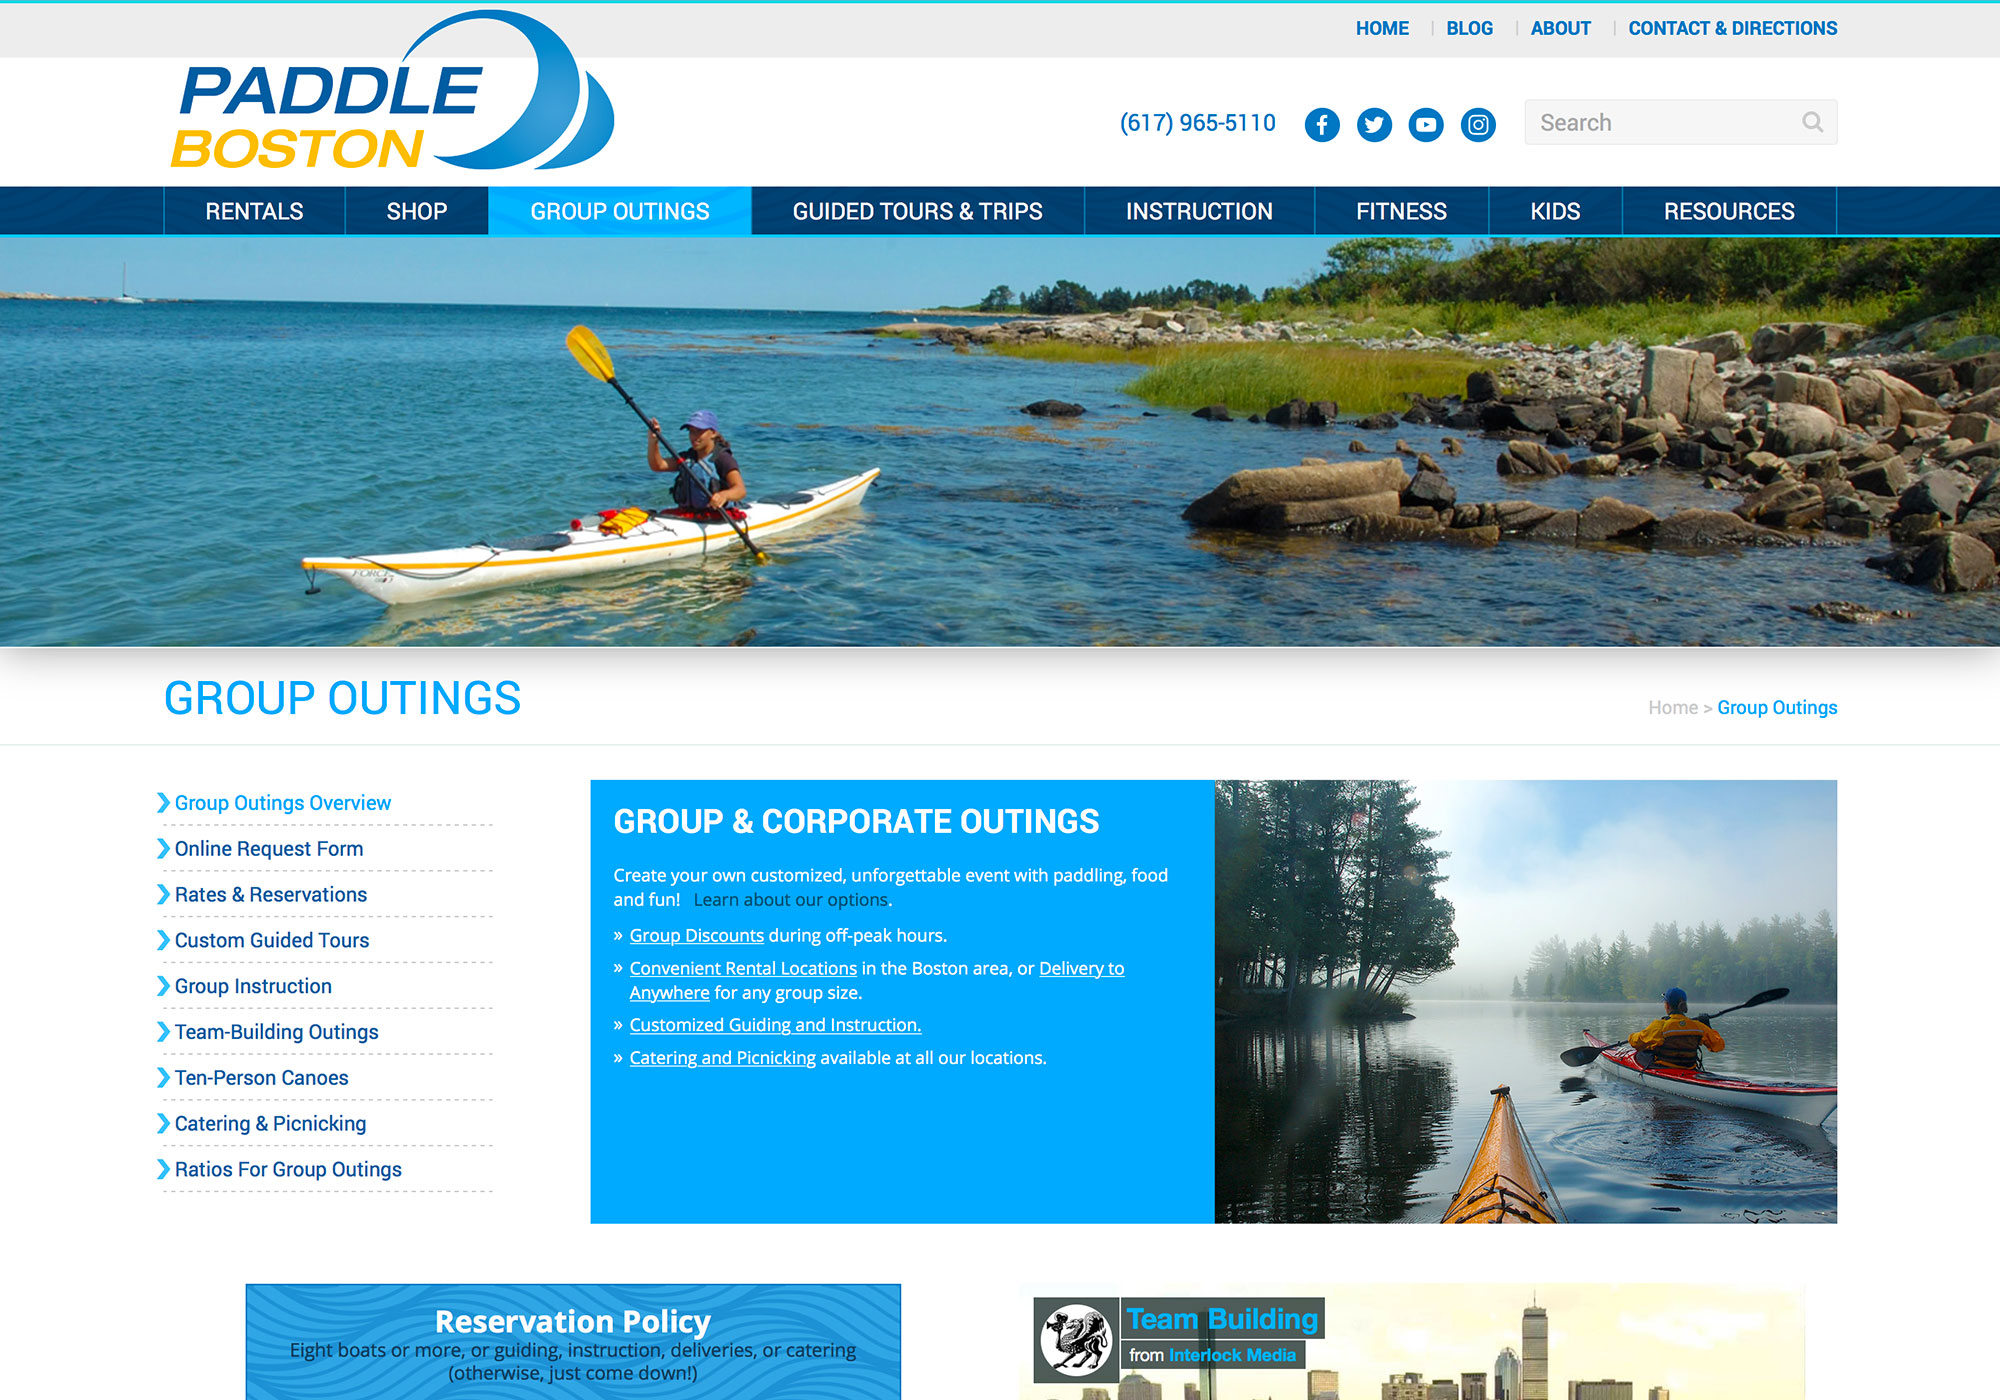 Signing up for Paddle Bostons Group Outings on Kayaks, and Canoes is easy with custom wordpress website design by Maine website design company, SlickFish Studios.